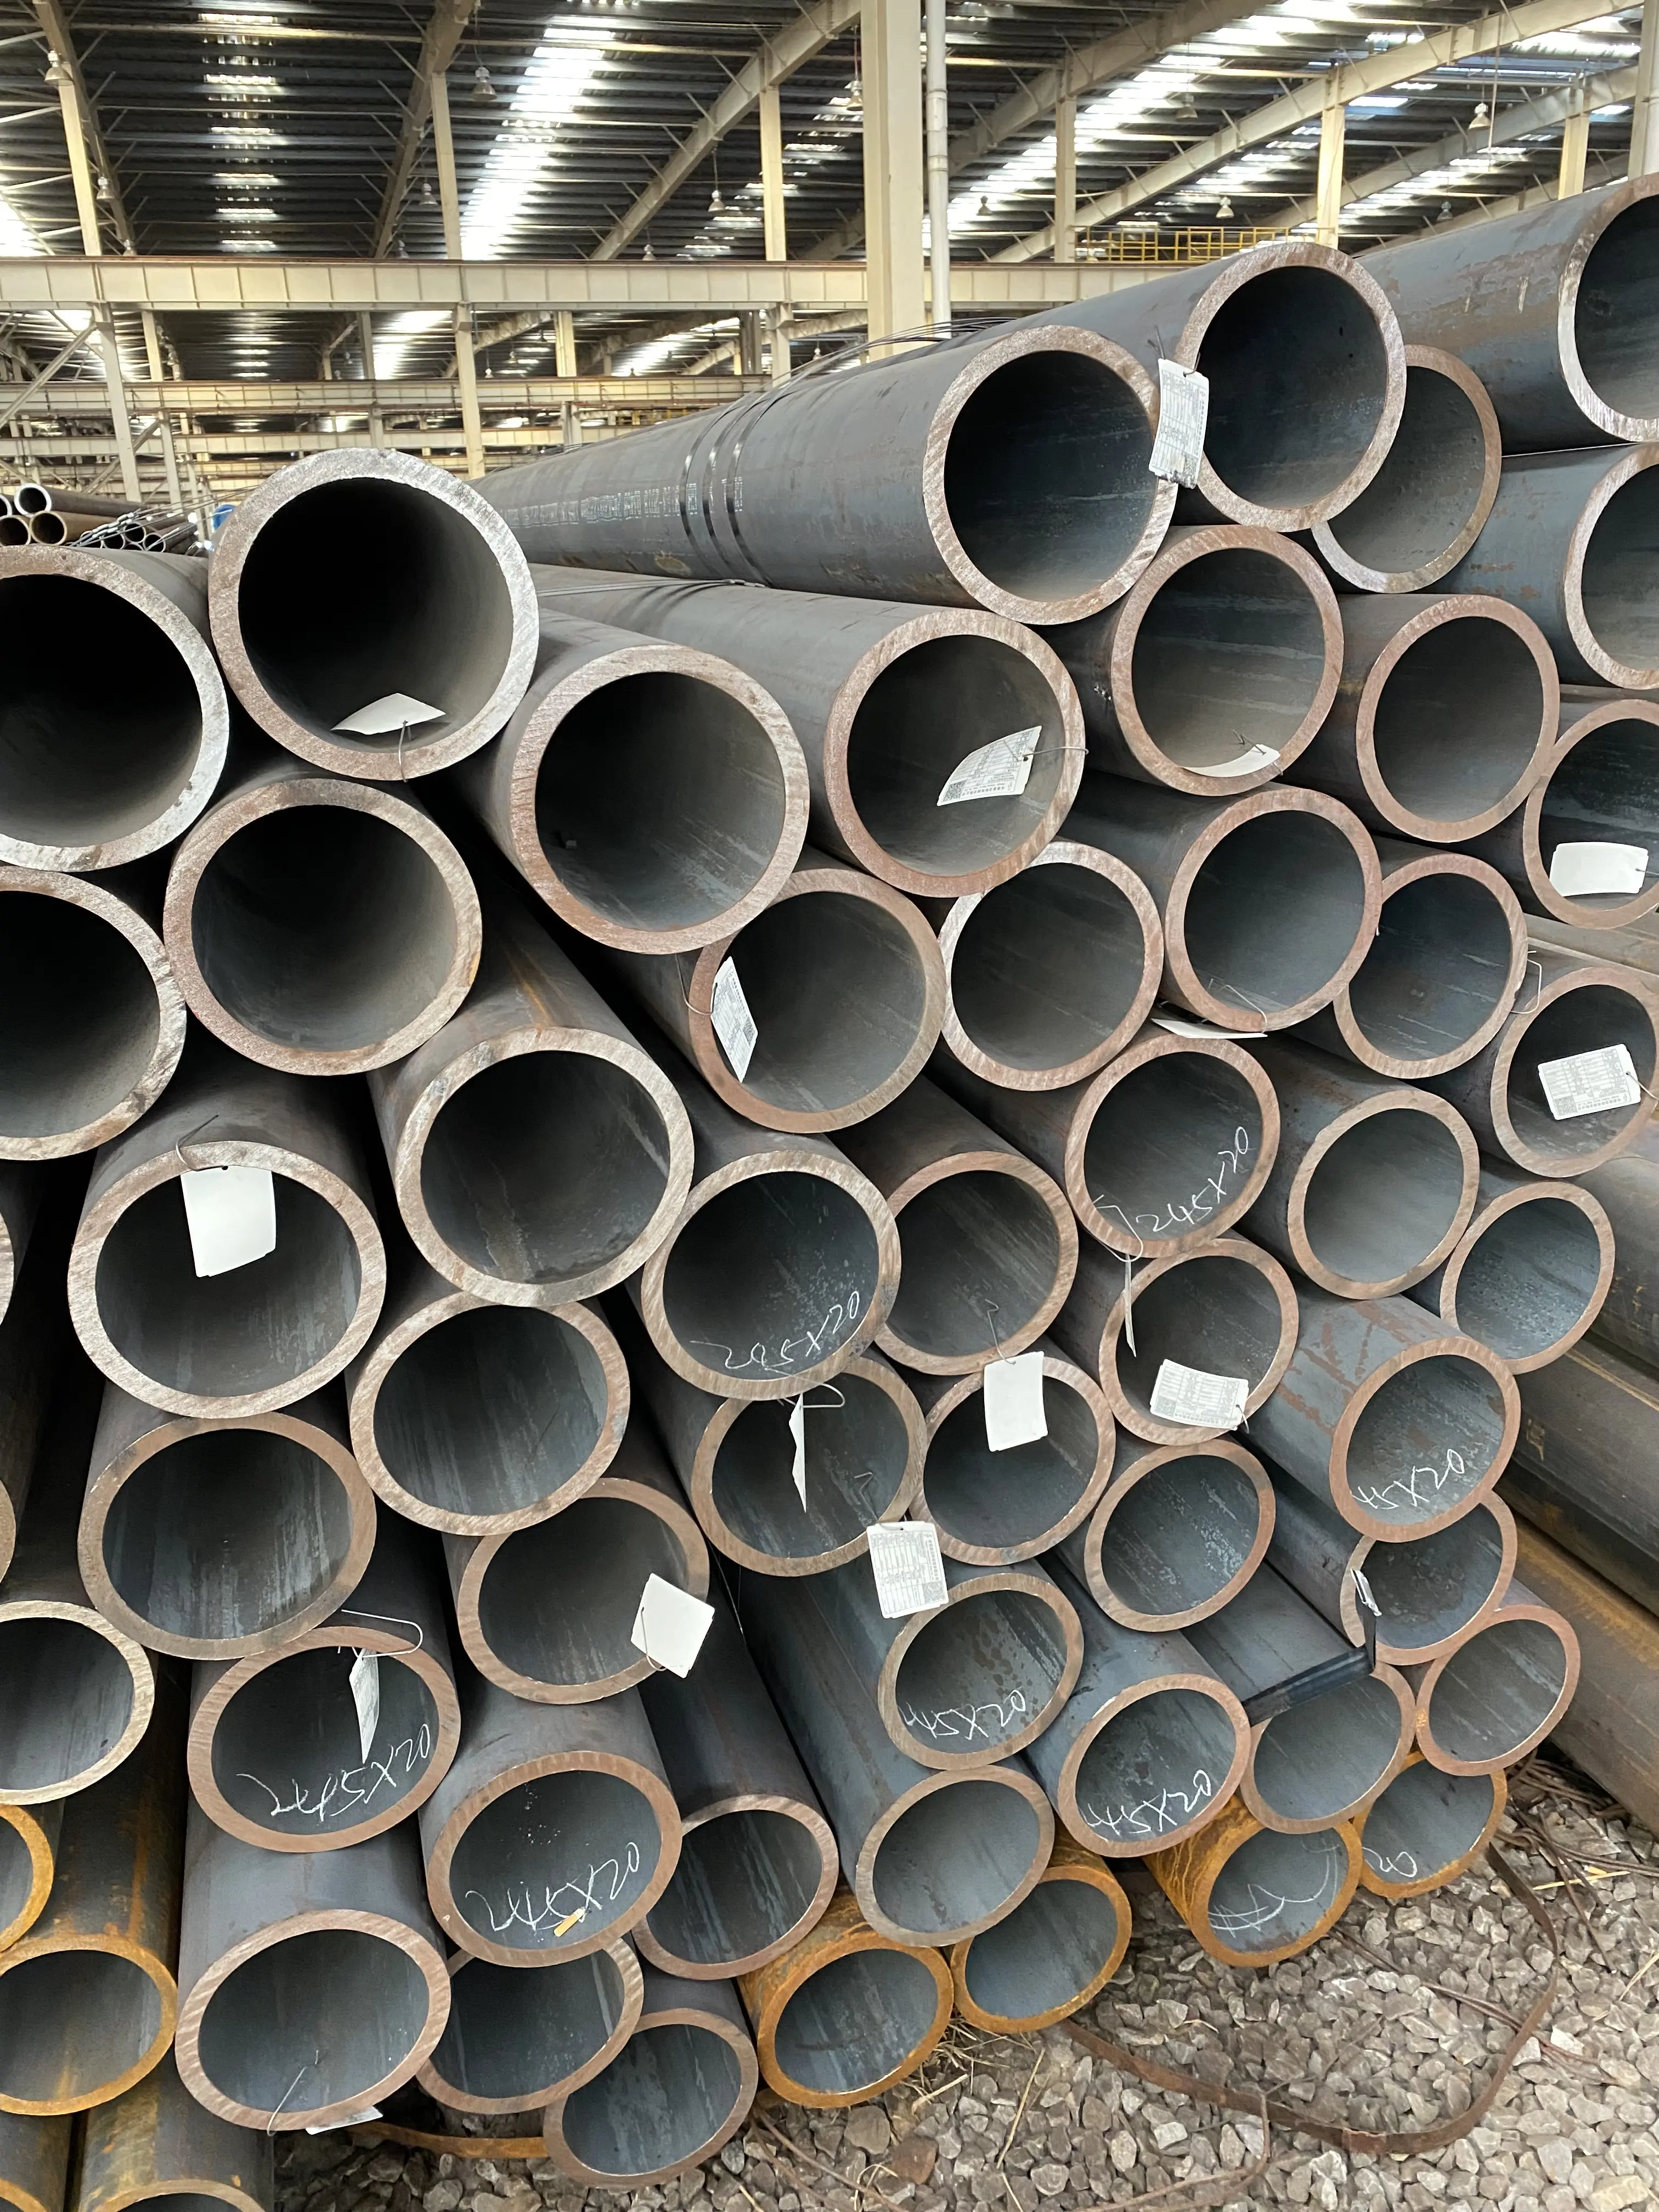 Black carbon steel seamless steel pipe API 5L GrB x42 x52 x60 high quality line pipe oil casing factory